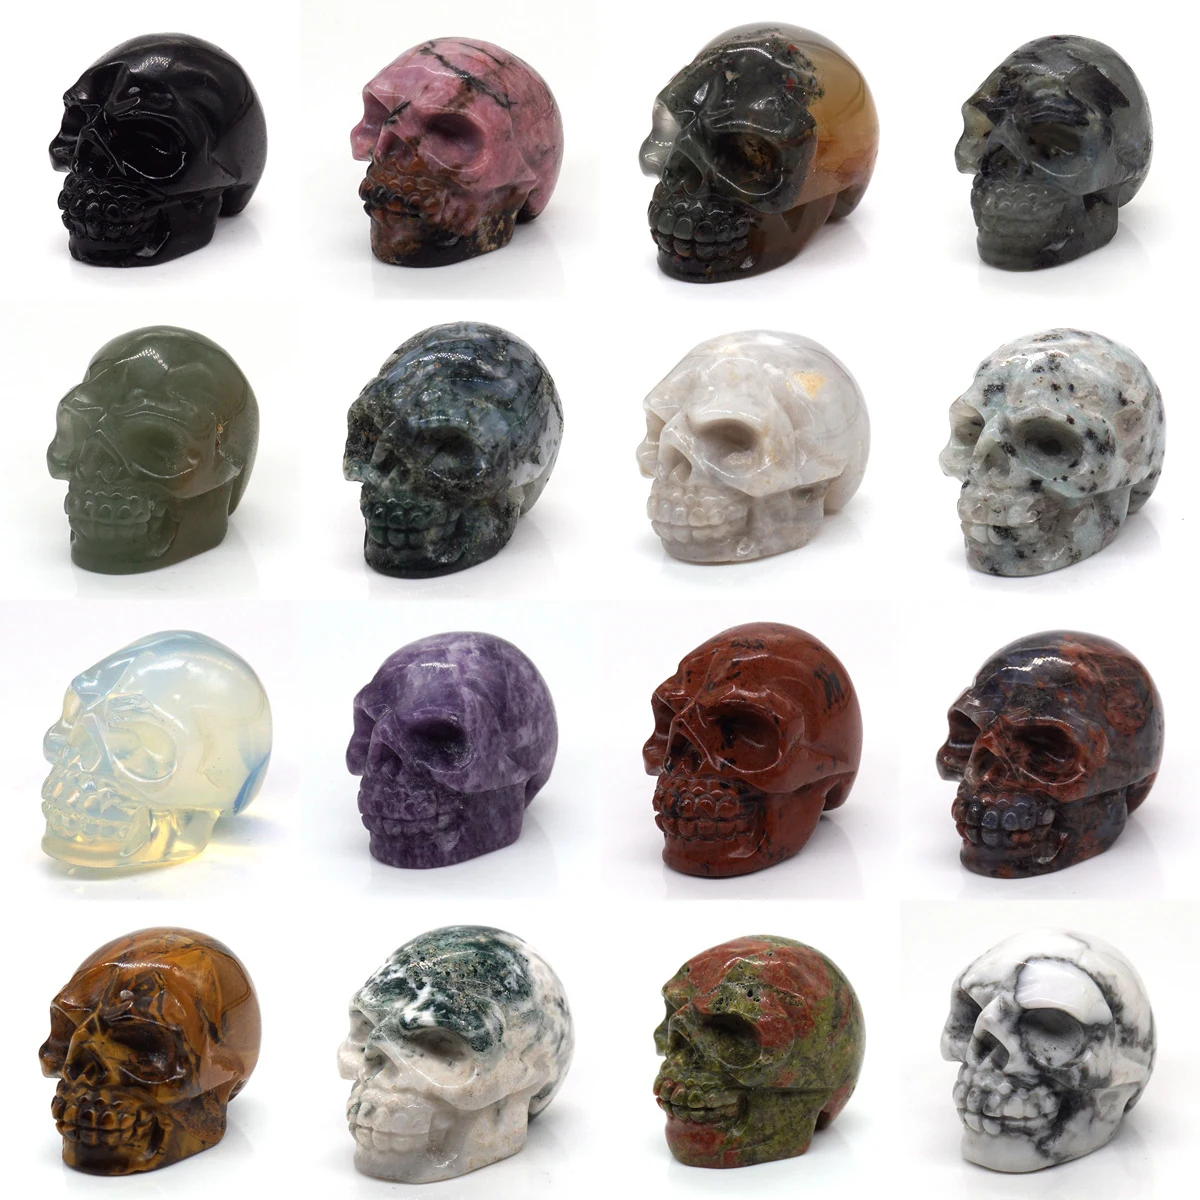 

1.5" Skull Statue Natural Stones Carved Healing Crystals Ornament Reiki Witchcraft Supplies Gemstone Wicca Halloween Decorations